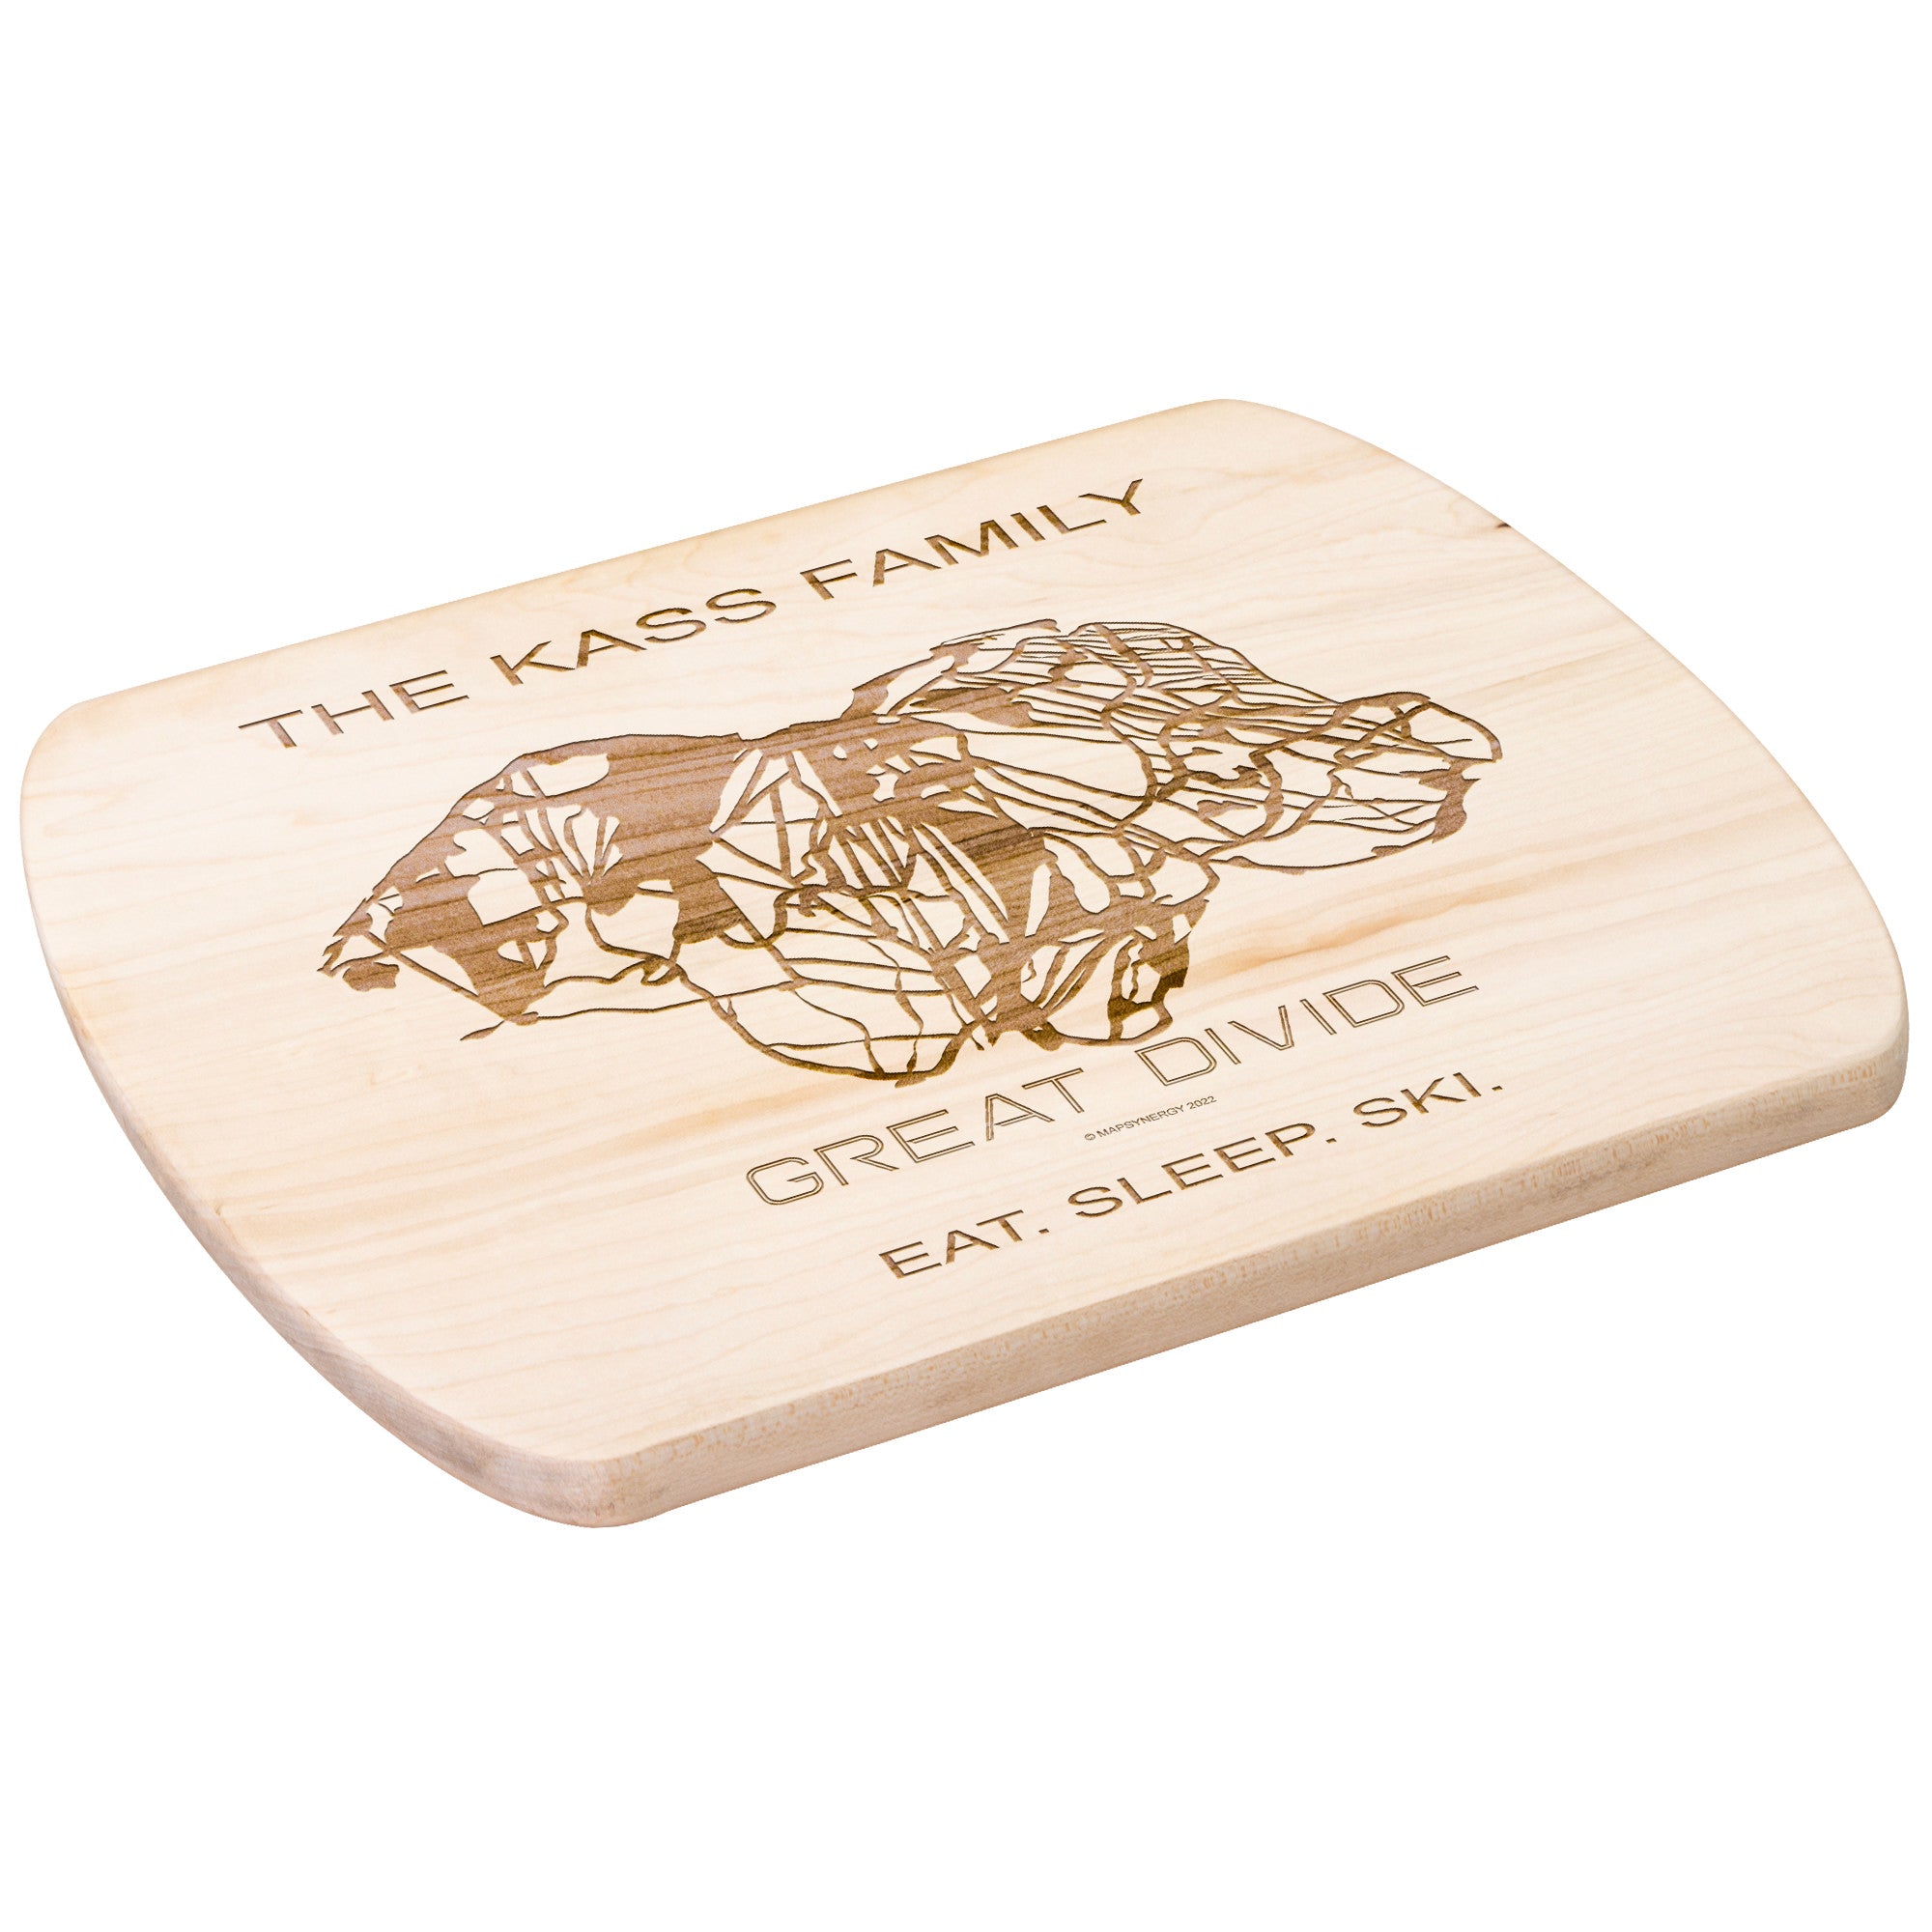 PERSONALIZED Great Divide , Montana SKI TRAIL MAP CUTTING BOARD